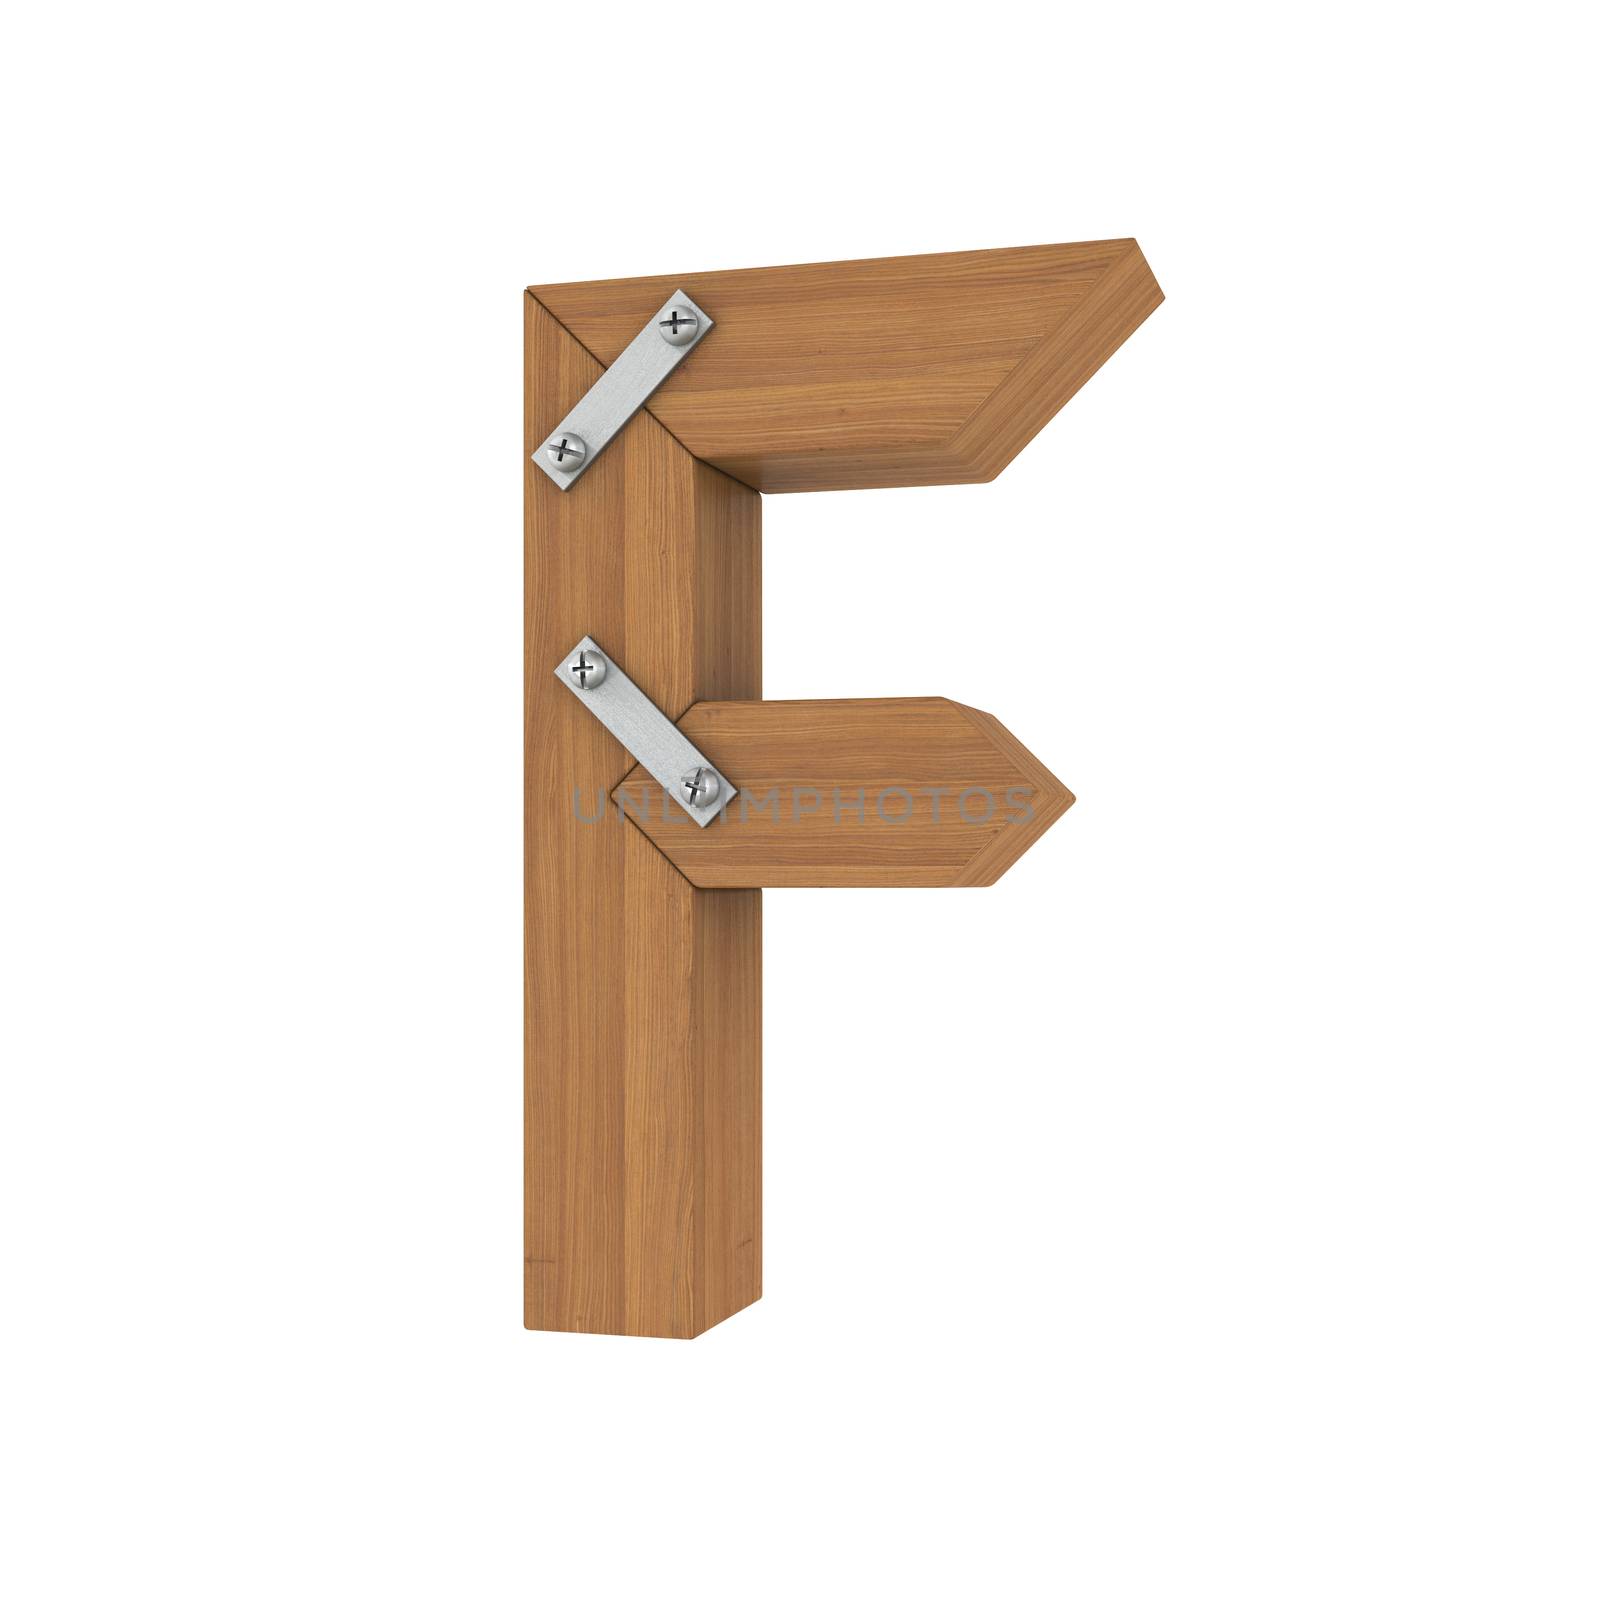 Wooden letter F by cherezoff